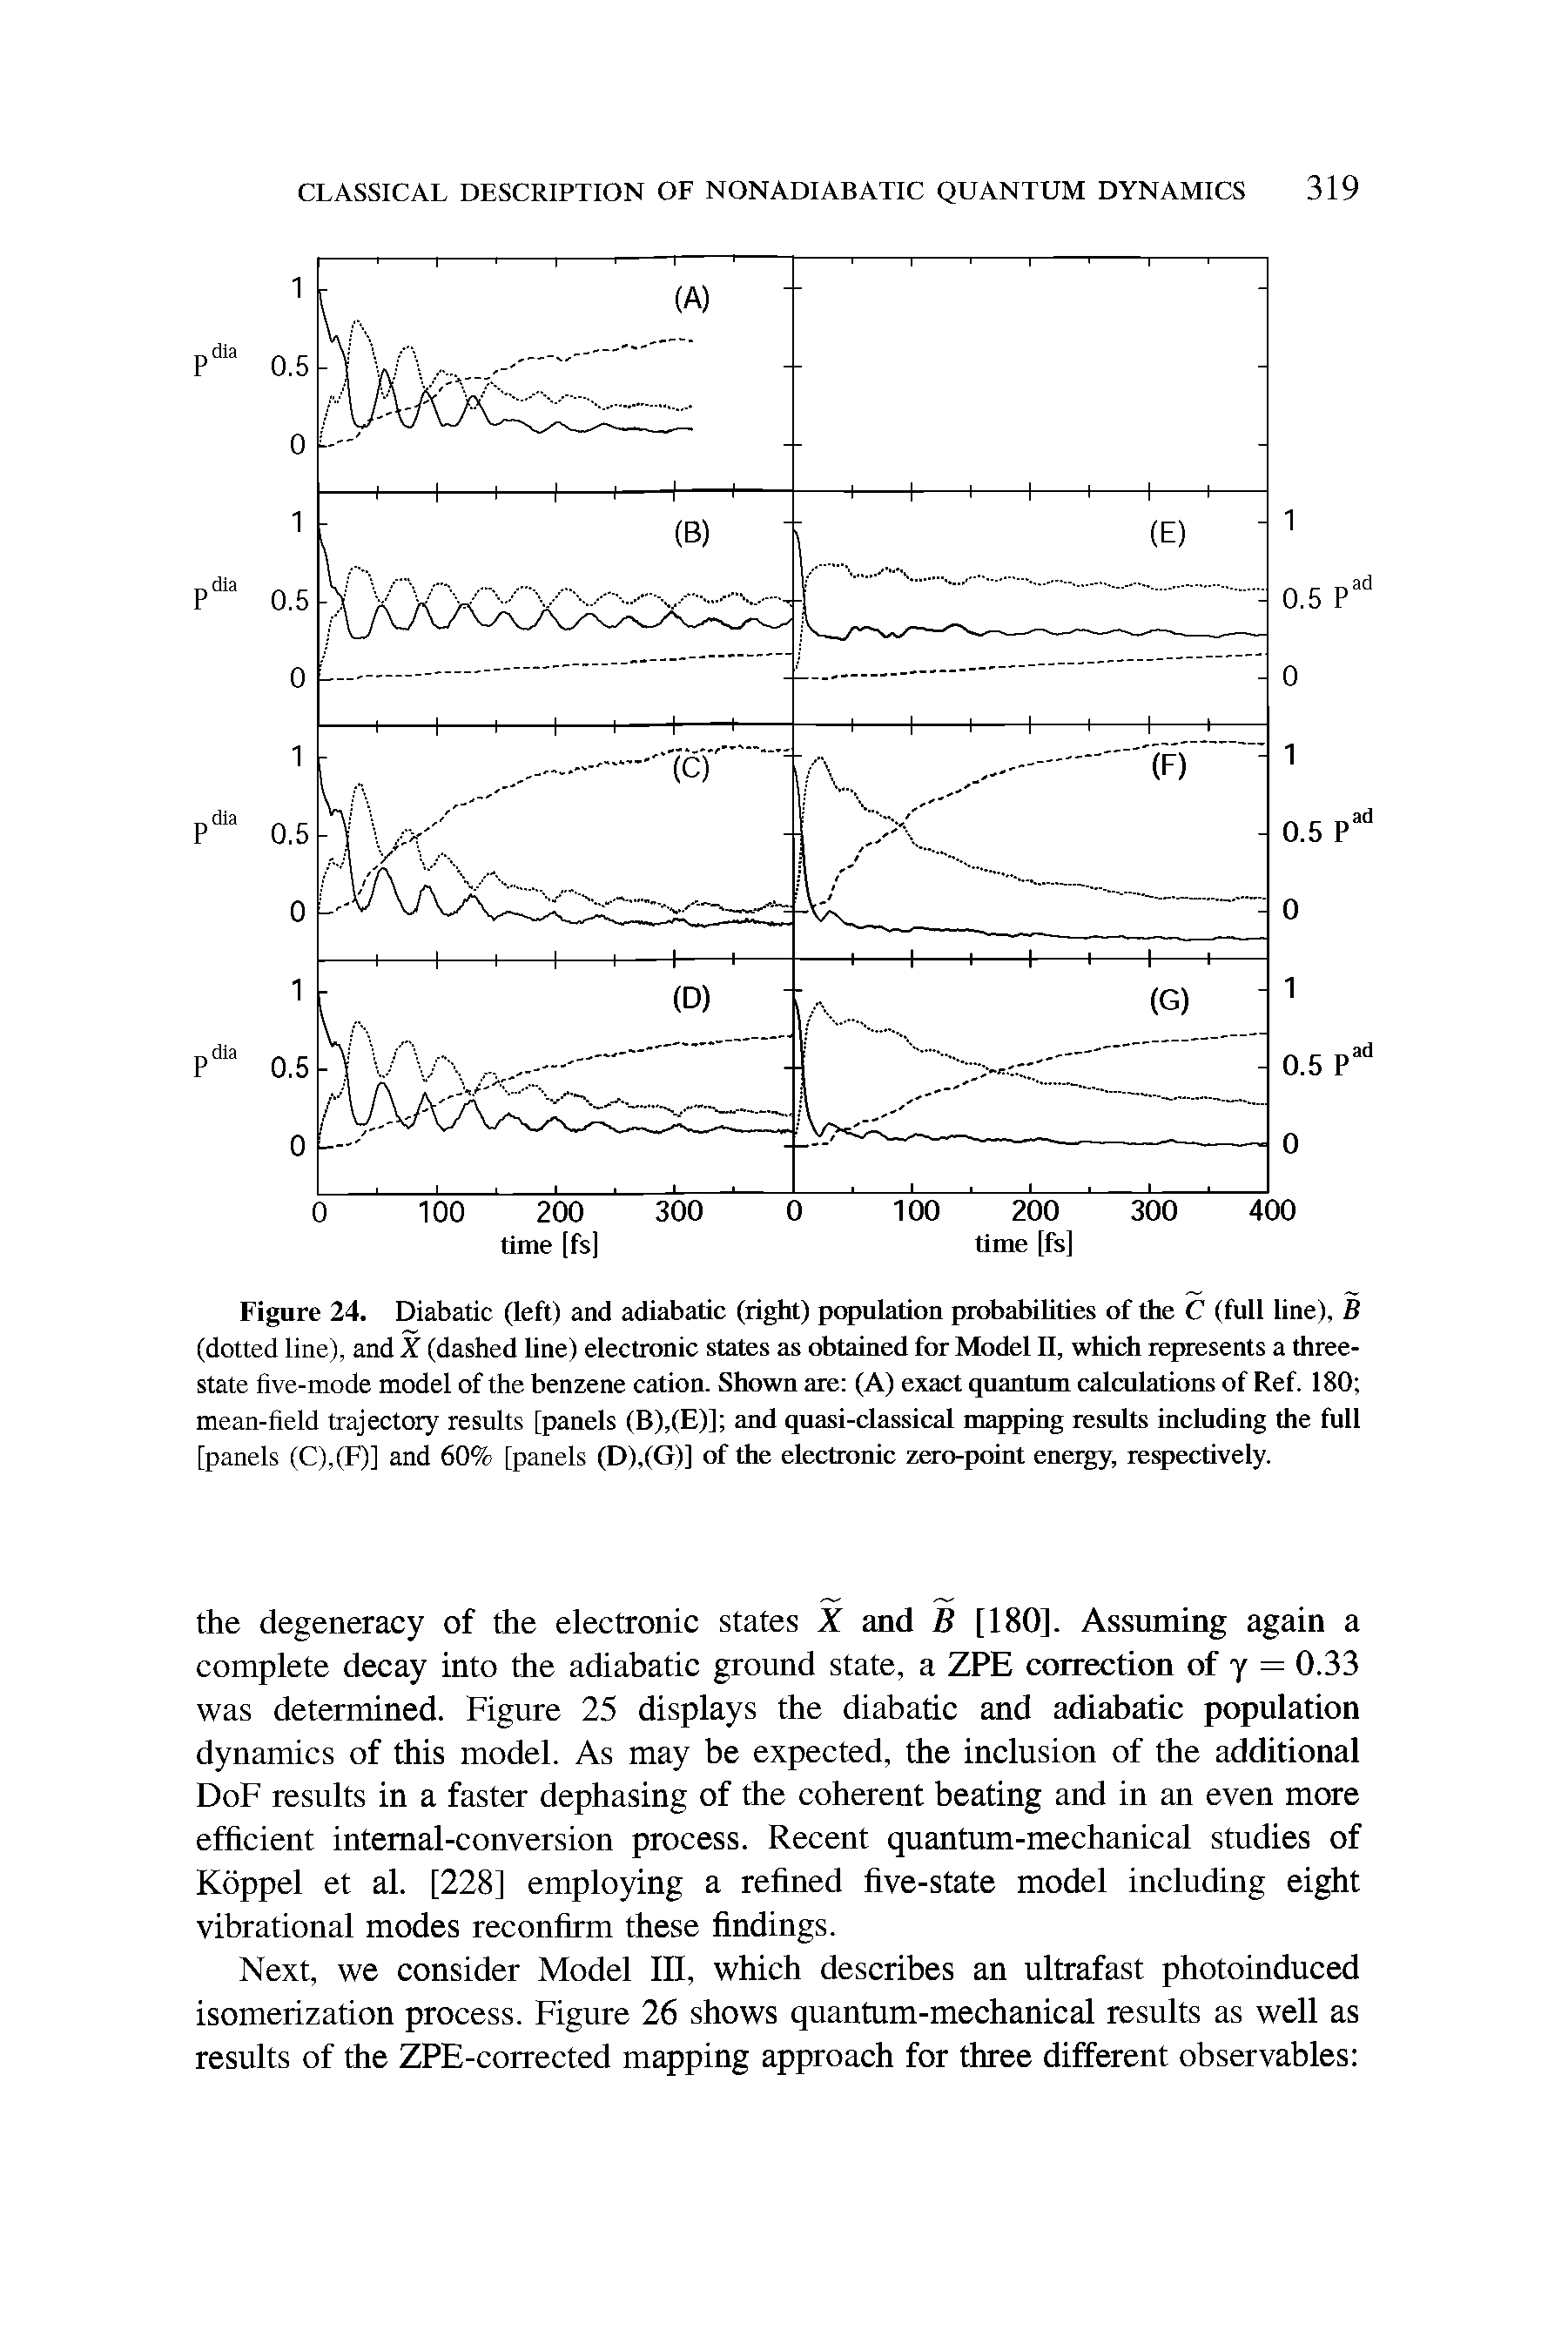 Figure 24. Diabatic (left) and adiabatic (right) population probabilities of the C (full line), B (dotted line), and X (dashed line) electronic states as obtained for Model II, which represents a three-state five-mode model of the benzene cation. Shown are (A) exact quantum calculations of Ref. 180 mean-field trajectory results [panels (B),(E)] and quasi-classical mapping results including the full [panels (C),(F)] and 60% [panels (D),(G)] of the electronic zero-point energy, respectively.